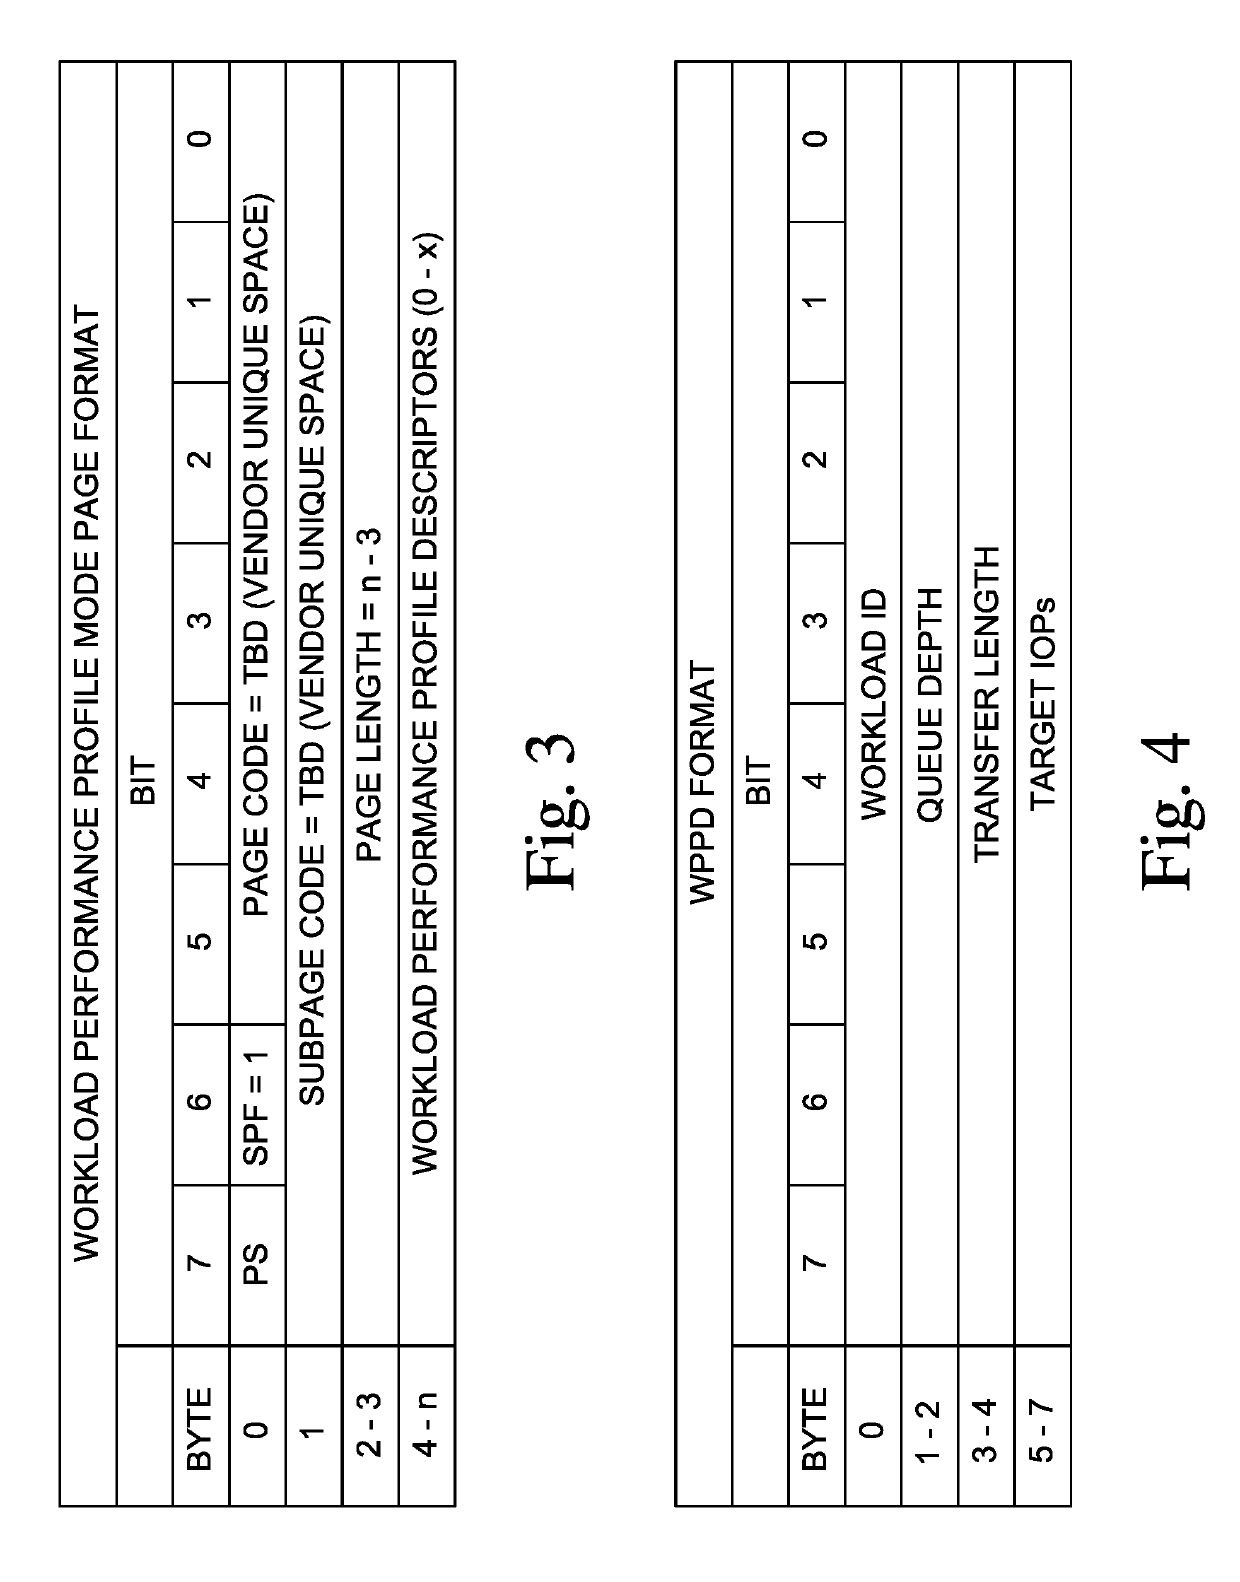 Automatic performance tuning for memory arrangements